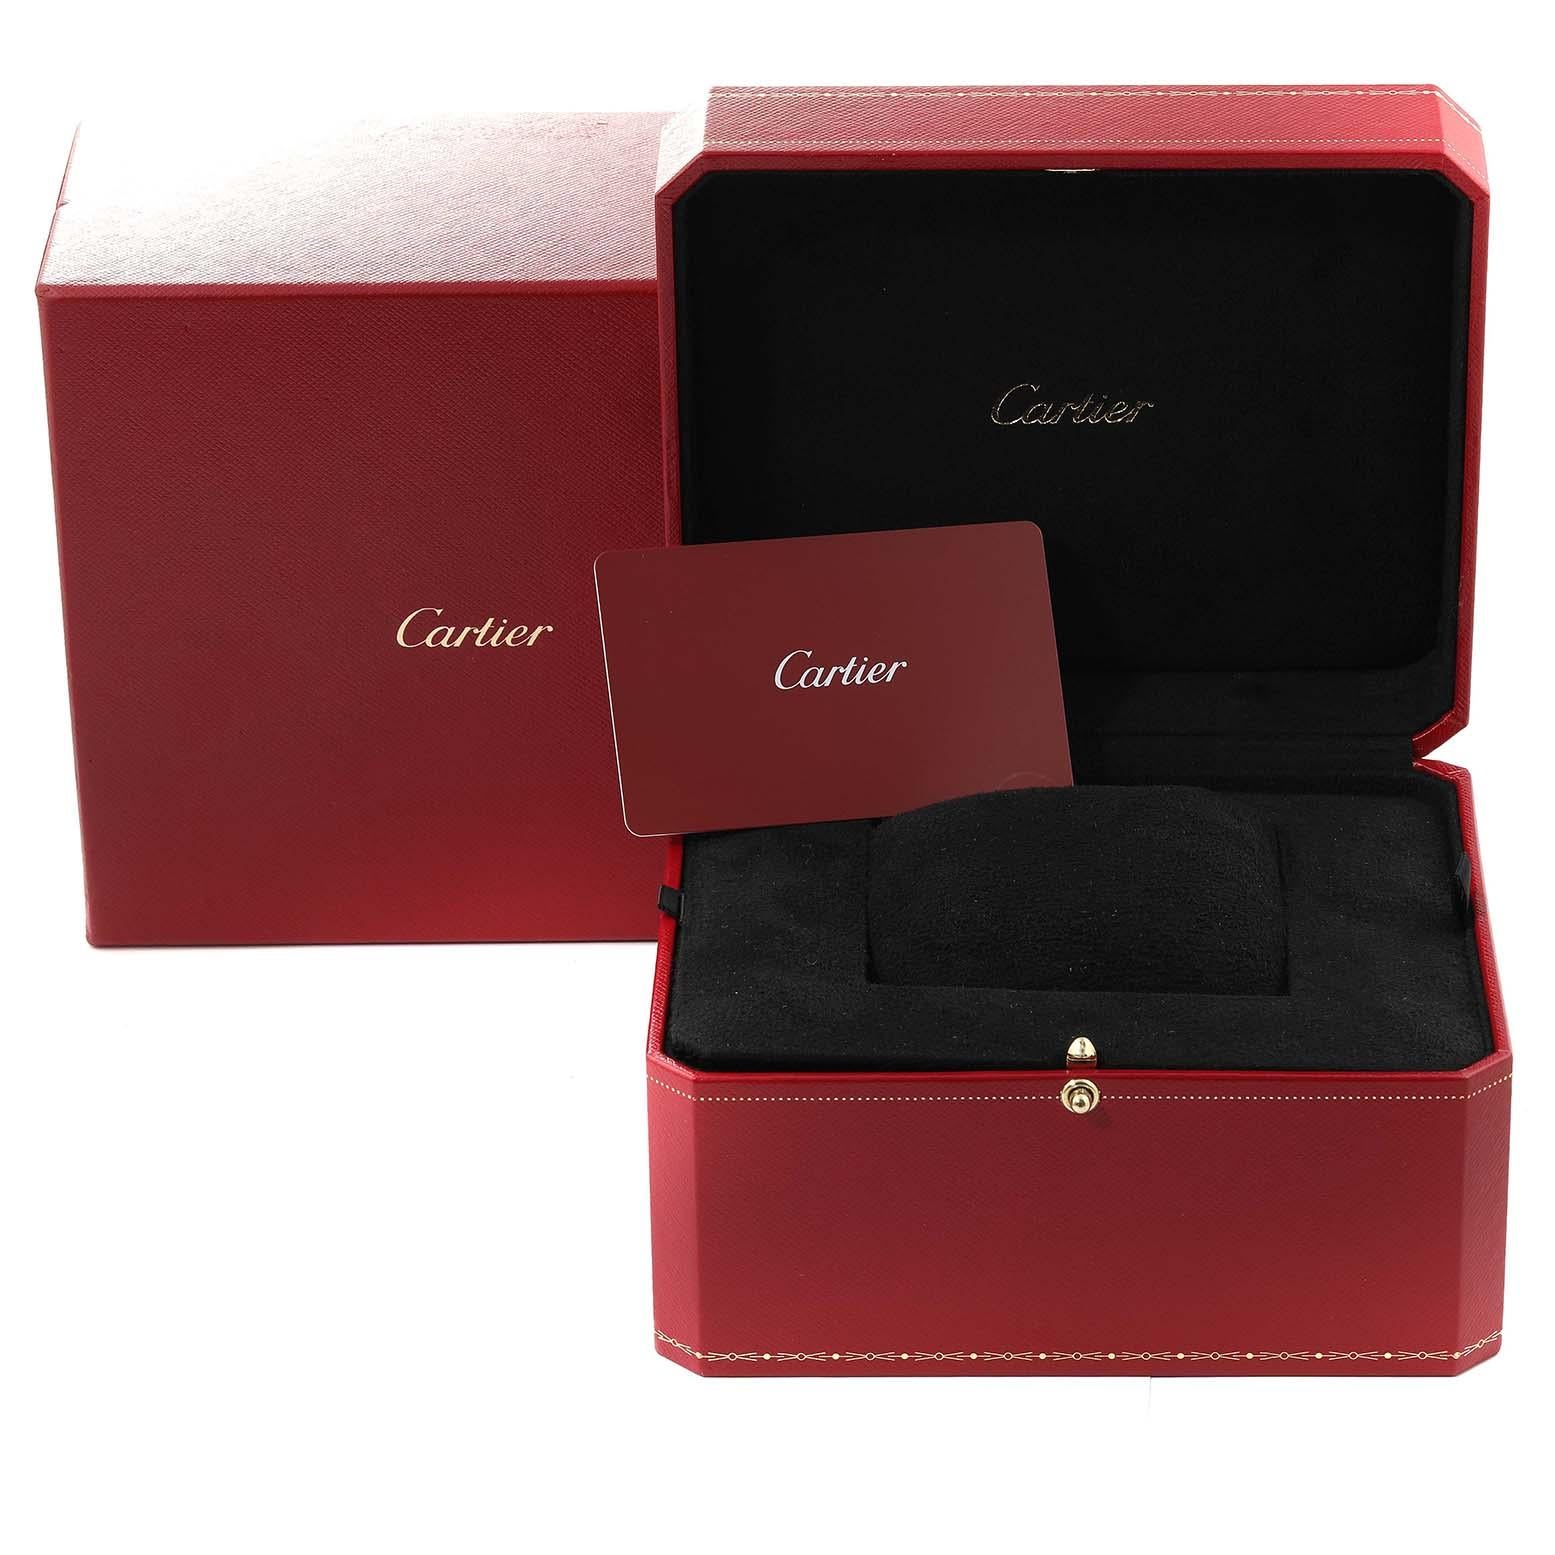 Cartier Baignoire Large White Gold Diamond Ladies Watch WB520009 Box Card For Sale 4